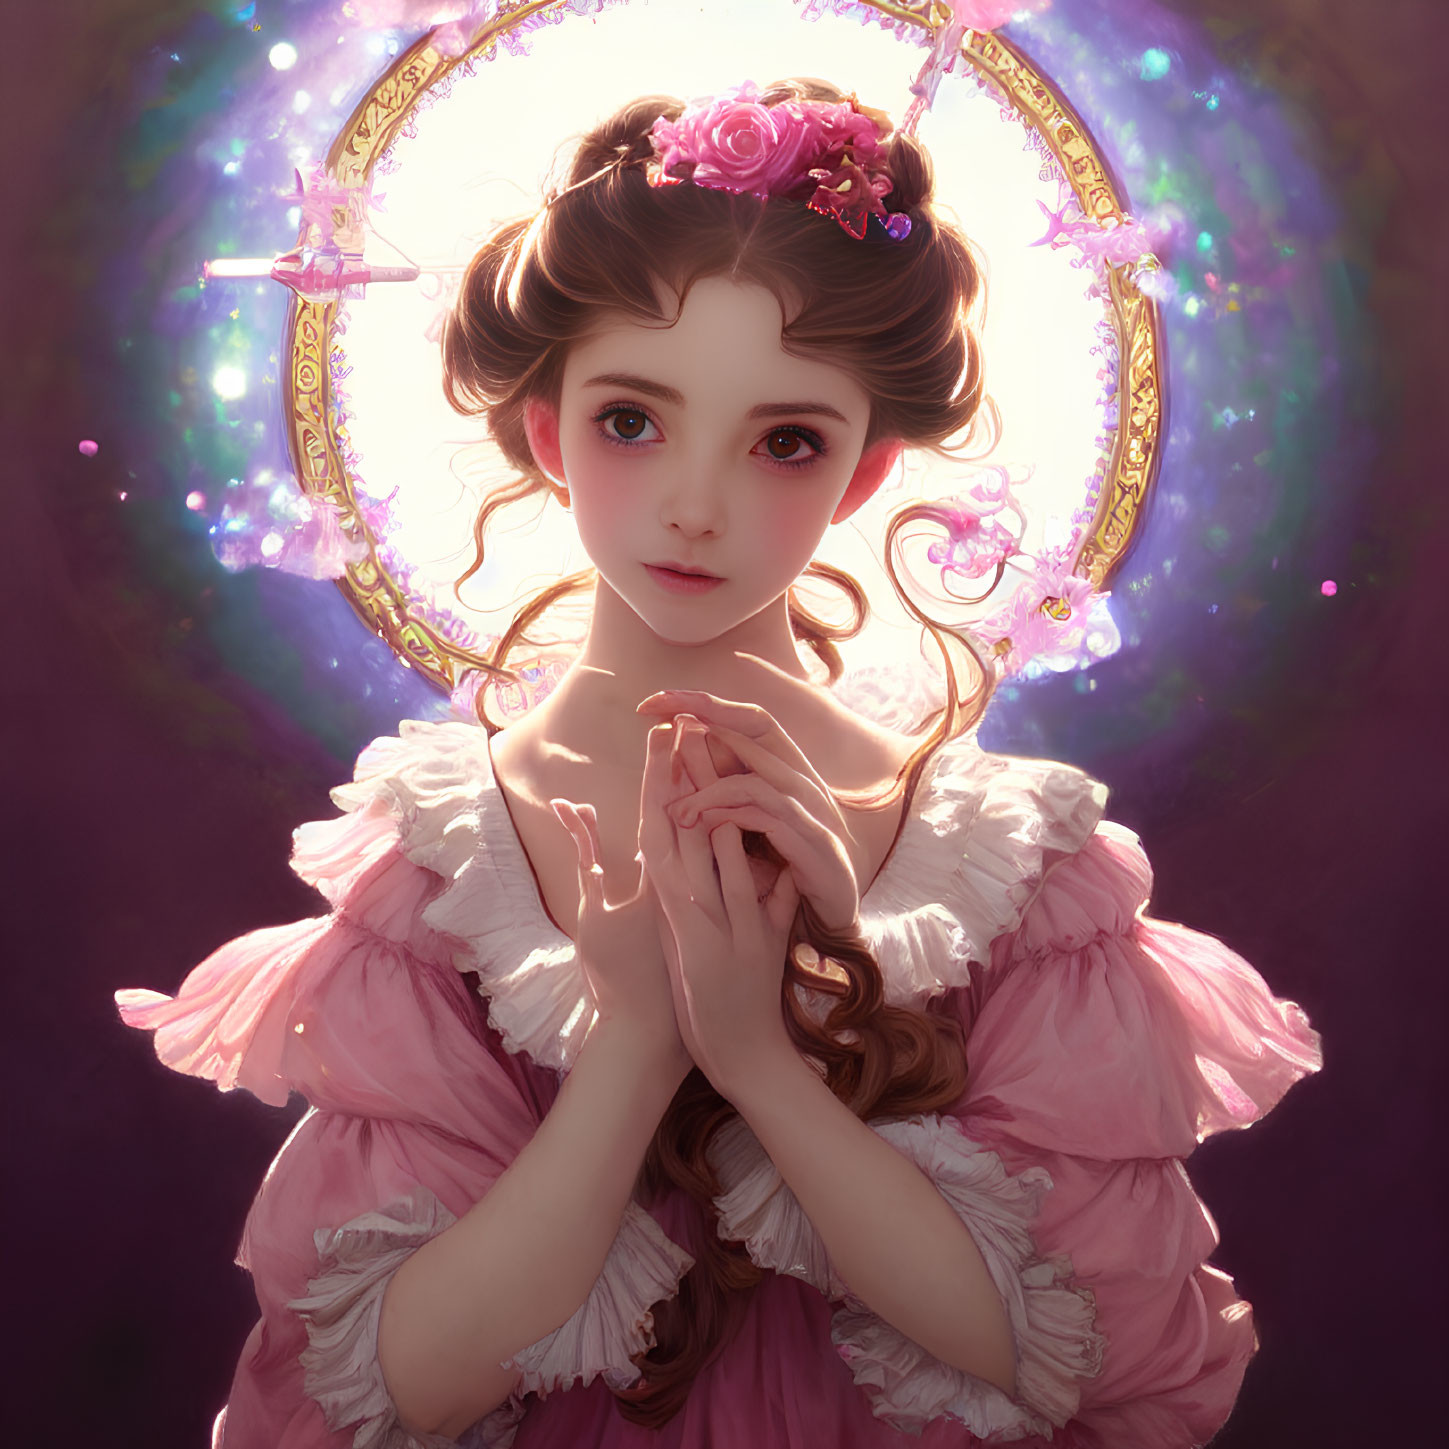 Digital art portrait of young woman in vintage pink dress with floral headpiece and golden halo.